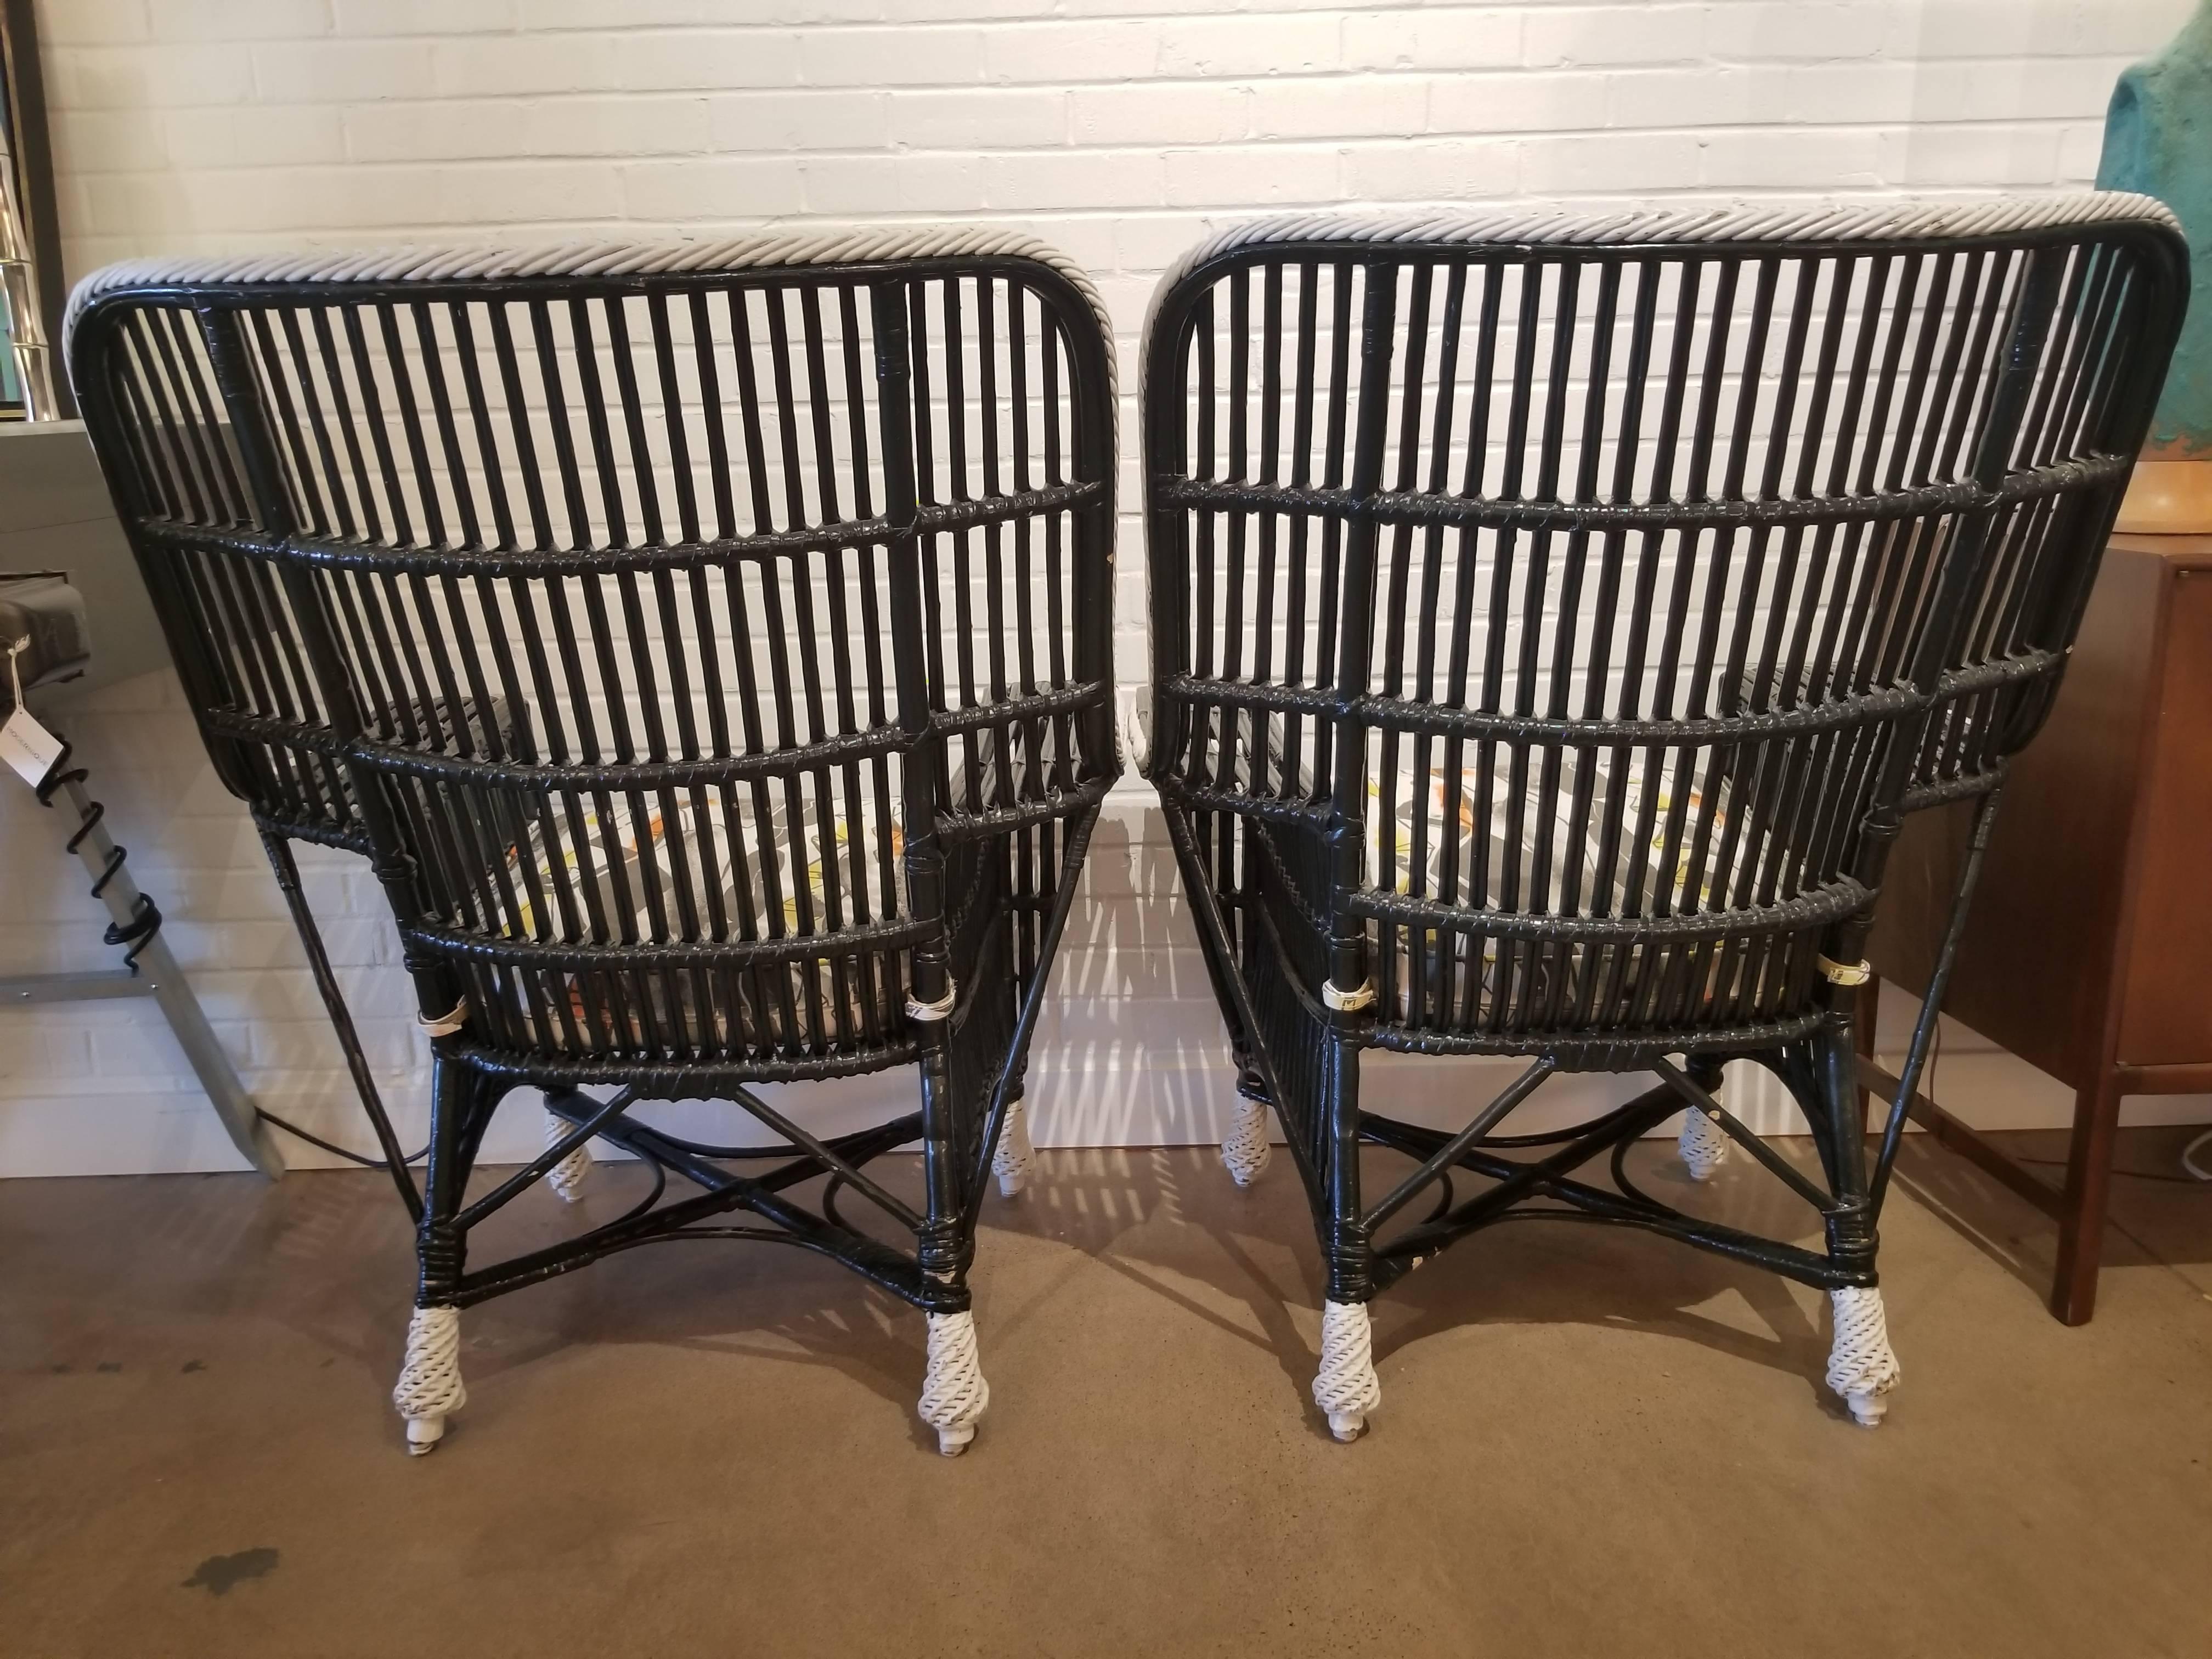 This pair of vintage rattan chairs have been painted in Benjamin Moore 